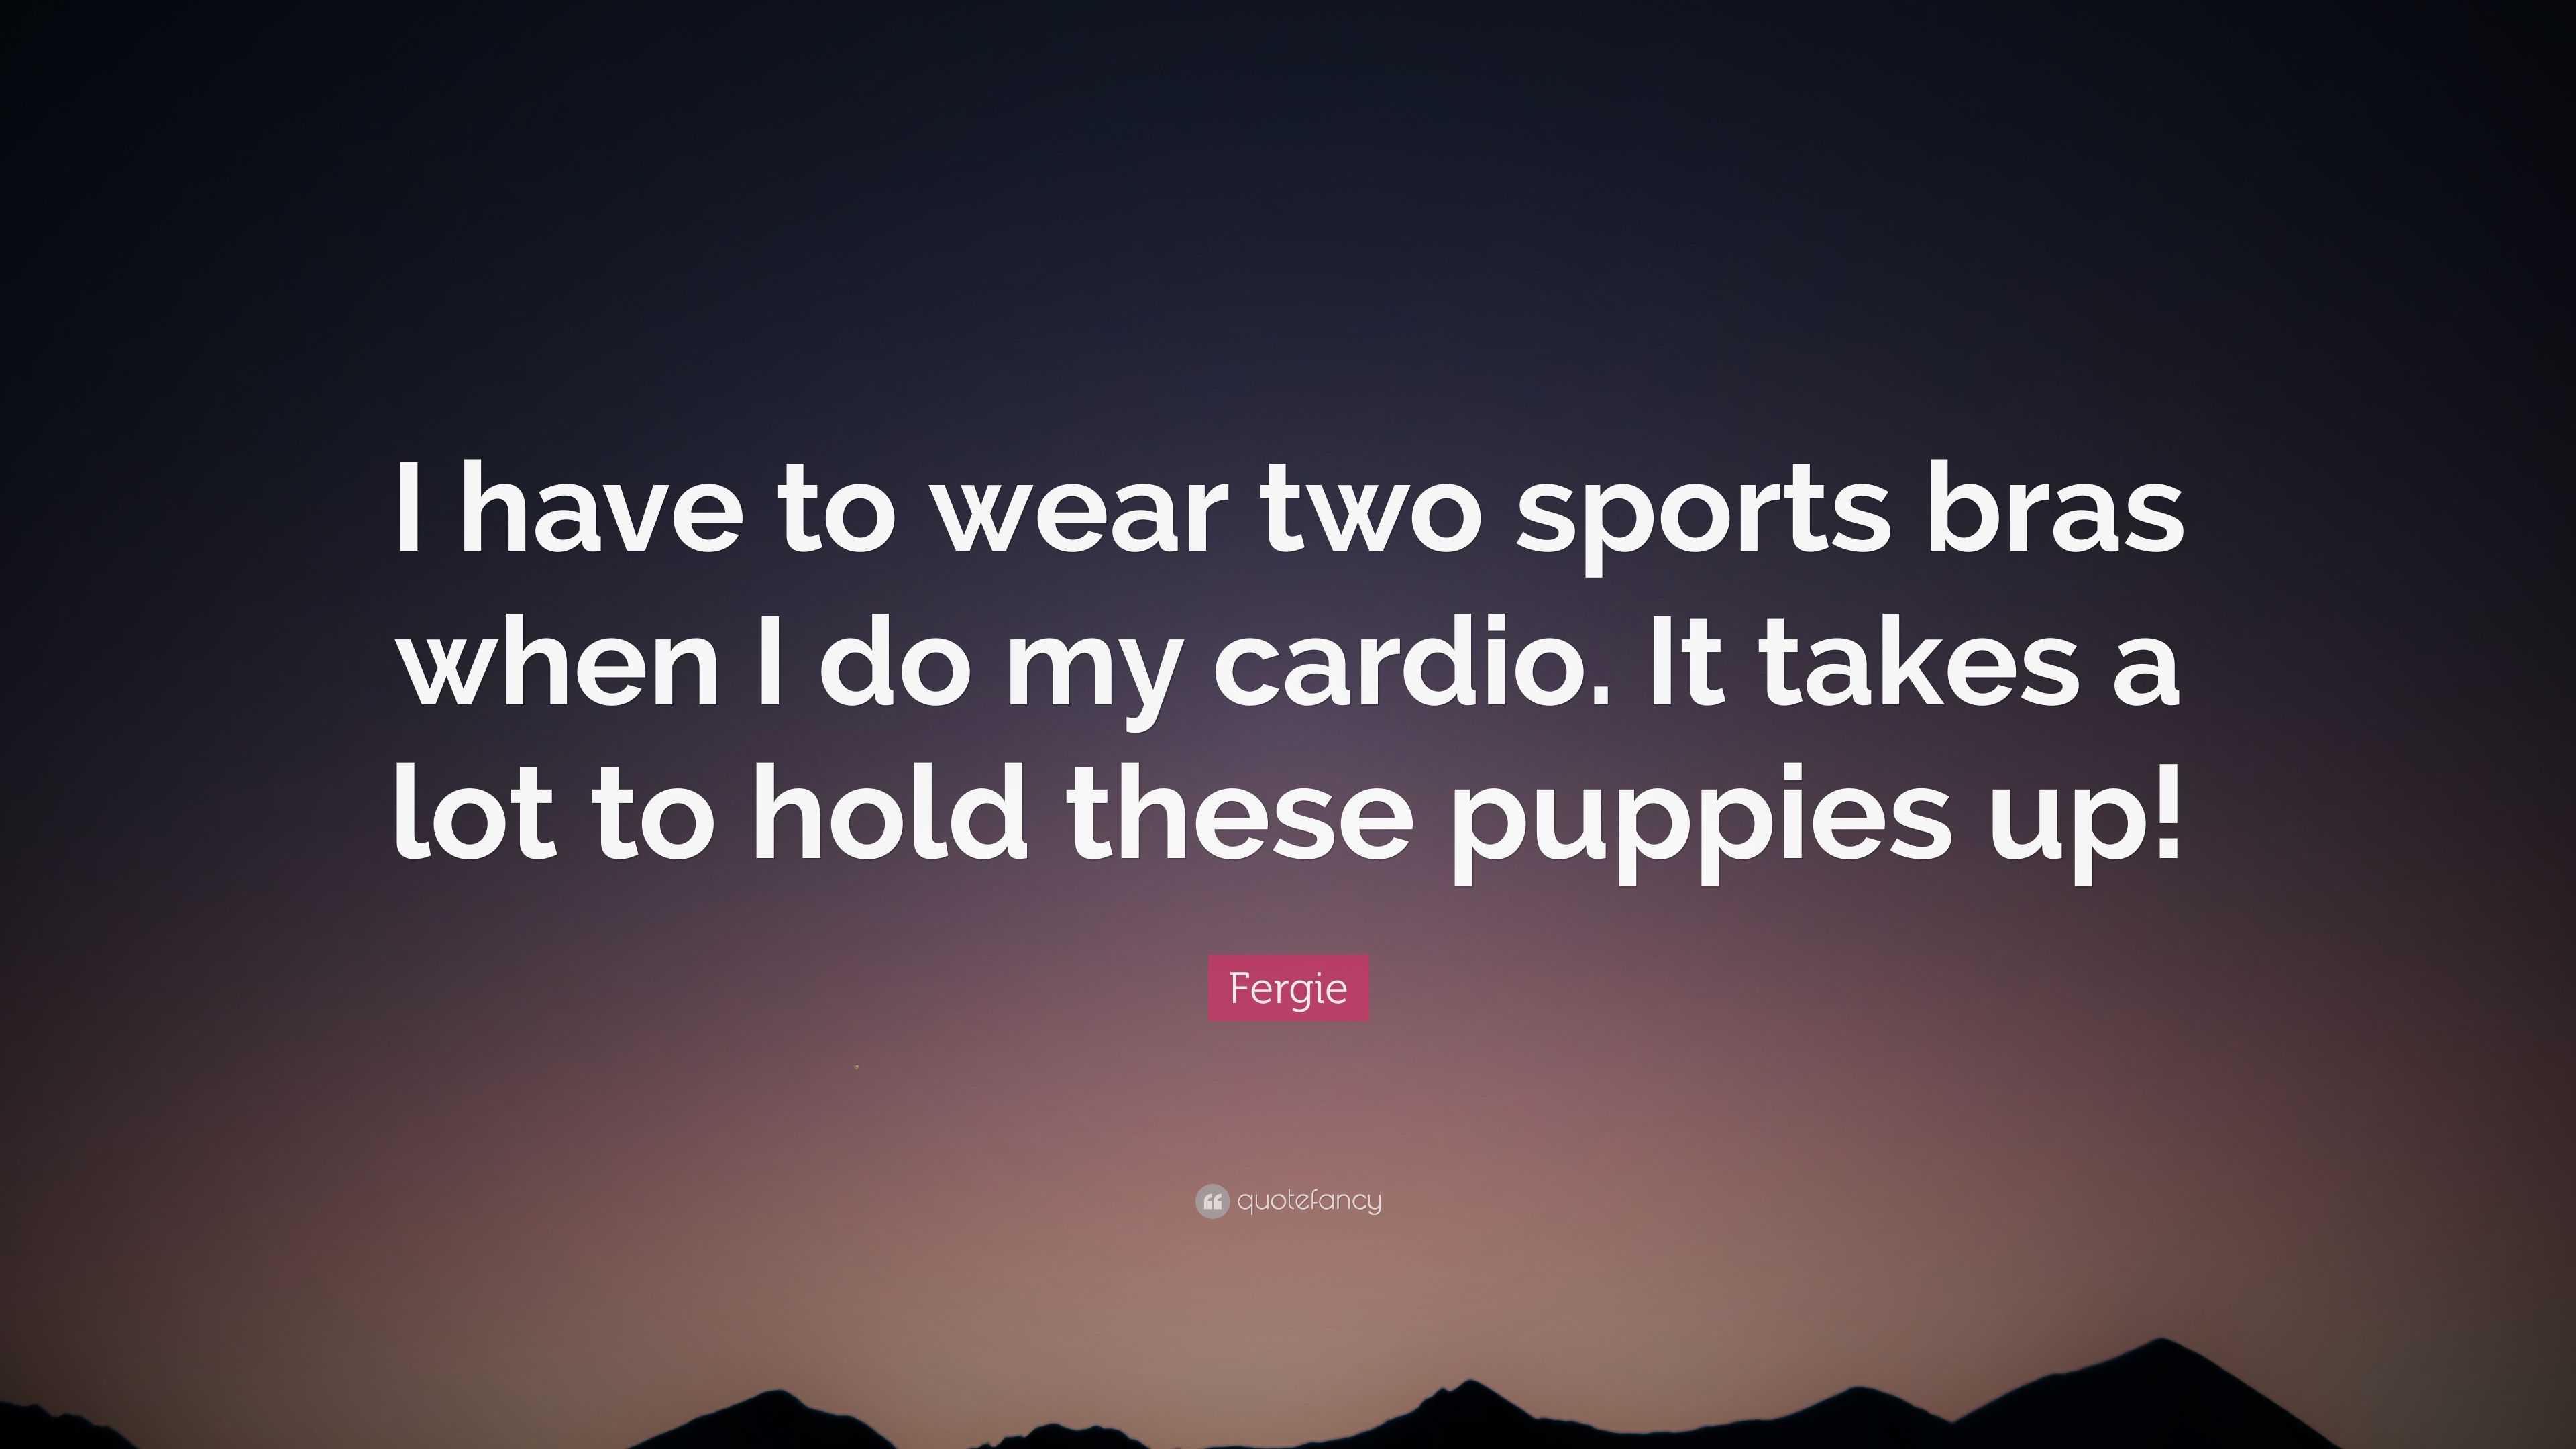 Fergie Quote: “I have to wear two sports bras when I do my cardio. It takes